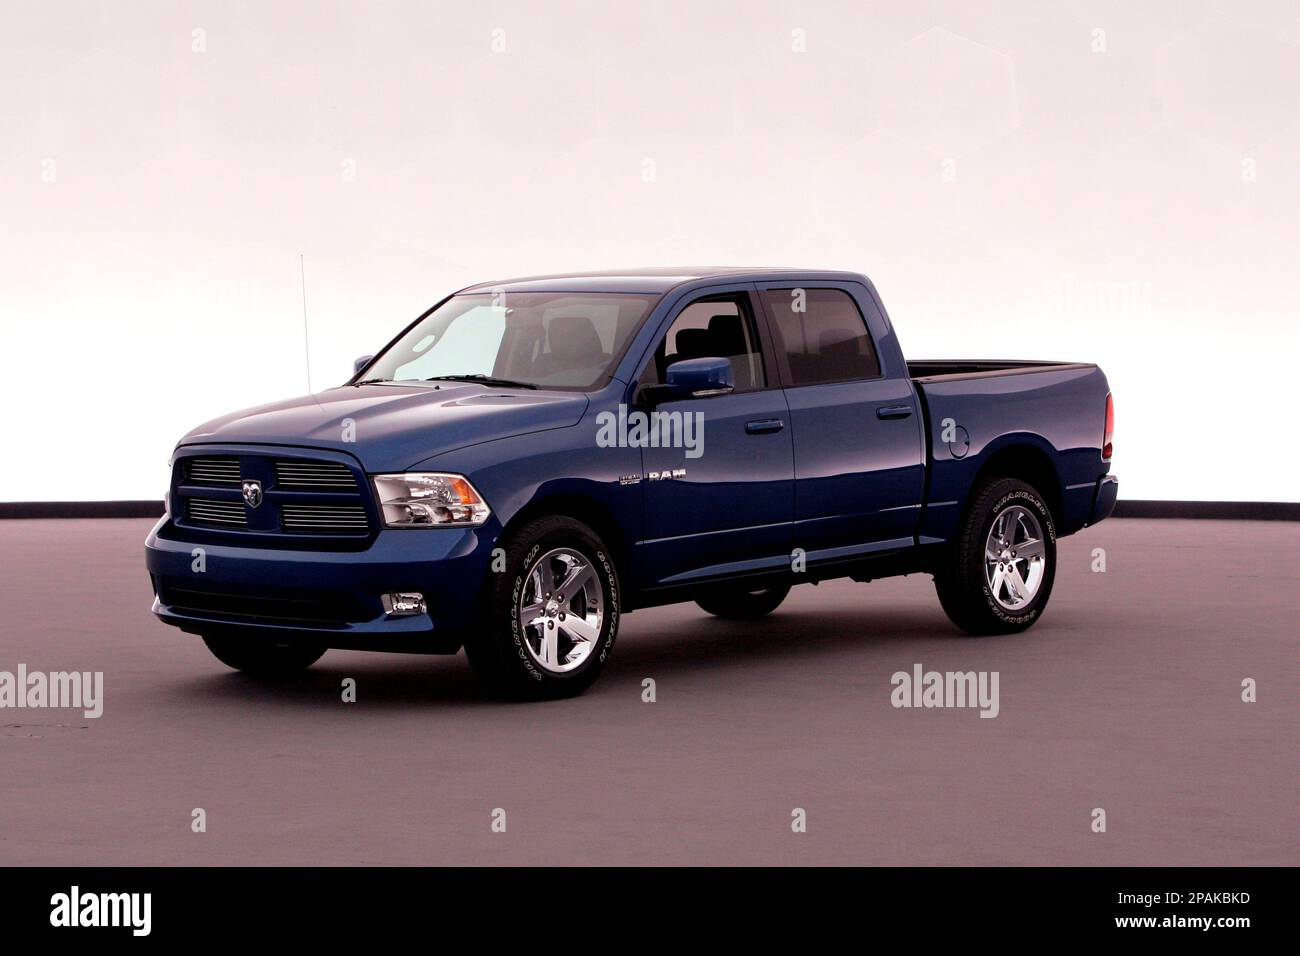 ** HOLD FOR RELEASE UNTIL AT 12:01 A.M. EST SUNDAY, JAN. 13. THIS STORY MAY NOT BE PUBLISHED, BROADCAST OR POSTED ONLINE BEFORE AT 12:01 A.M. EST SUNDAY, JAN. 13. **A 2009 Dodge Ram is seen at the Chrysler LLC headquarters in Auburn Hills, Mich., Friday, Jan. 11, 2008. The hyper-competitive U.S. pickup truck market is getting even more hype with new trucks from Ford and Chrysler that look nicer, perform better and are packed with more features than their predecessors. Chrysler will pull the tarp off the completely revamped Dodge Ram, Sunday, Jan. 13, 2008 at the North American International Au Stock Photo